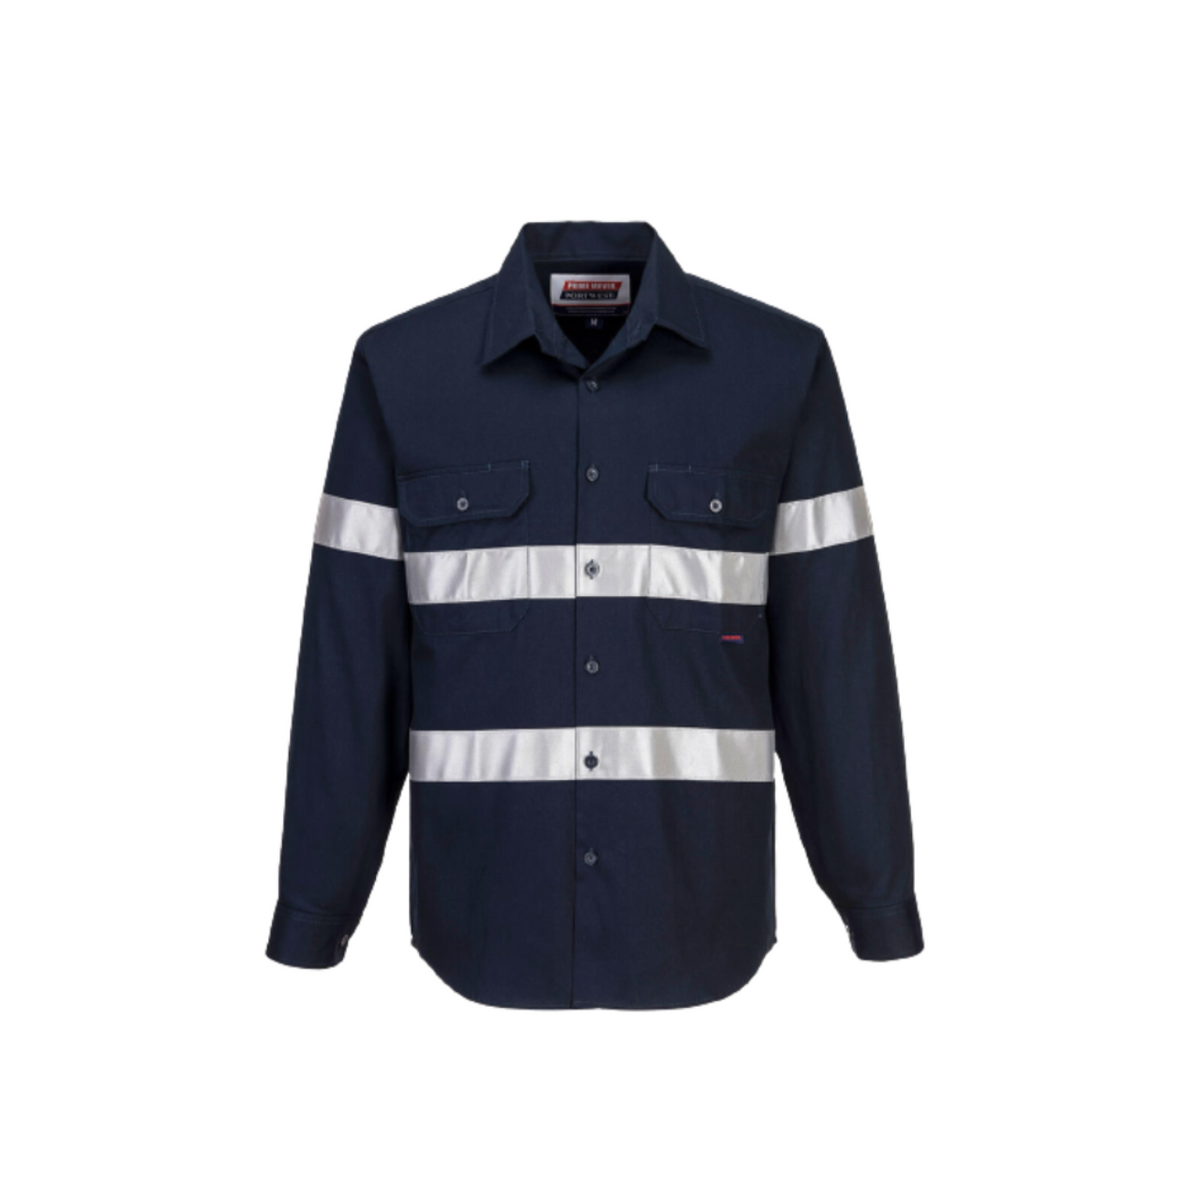 Portwest Geelong Shirt, Long Sleeve, Regular Weight Reflective Safety MA908-Collins Clothing Co